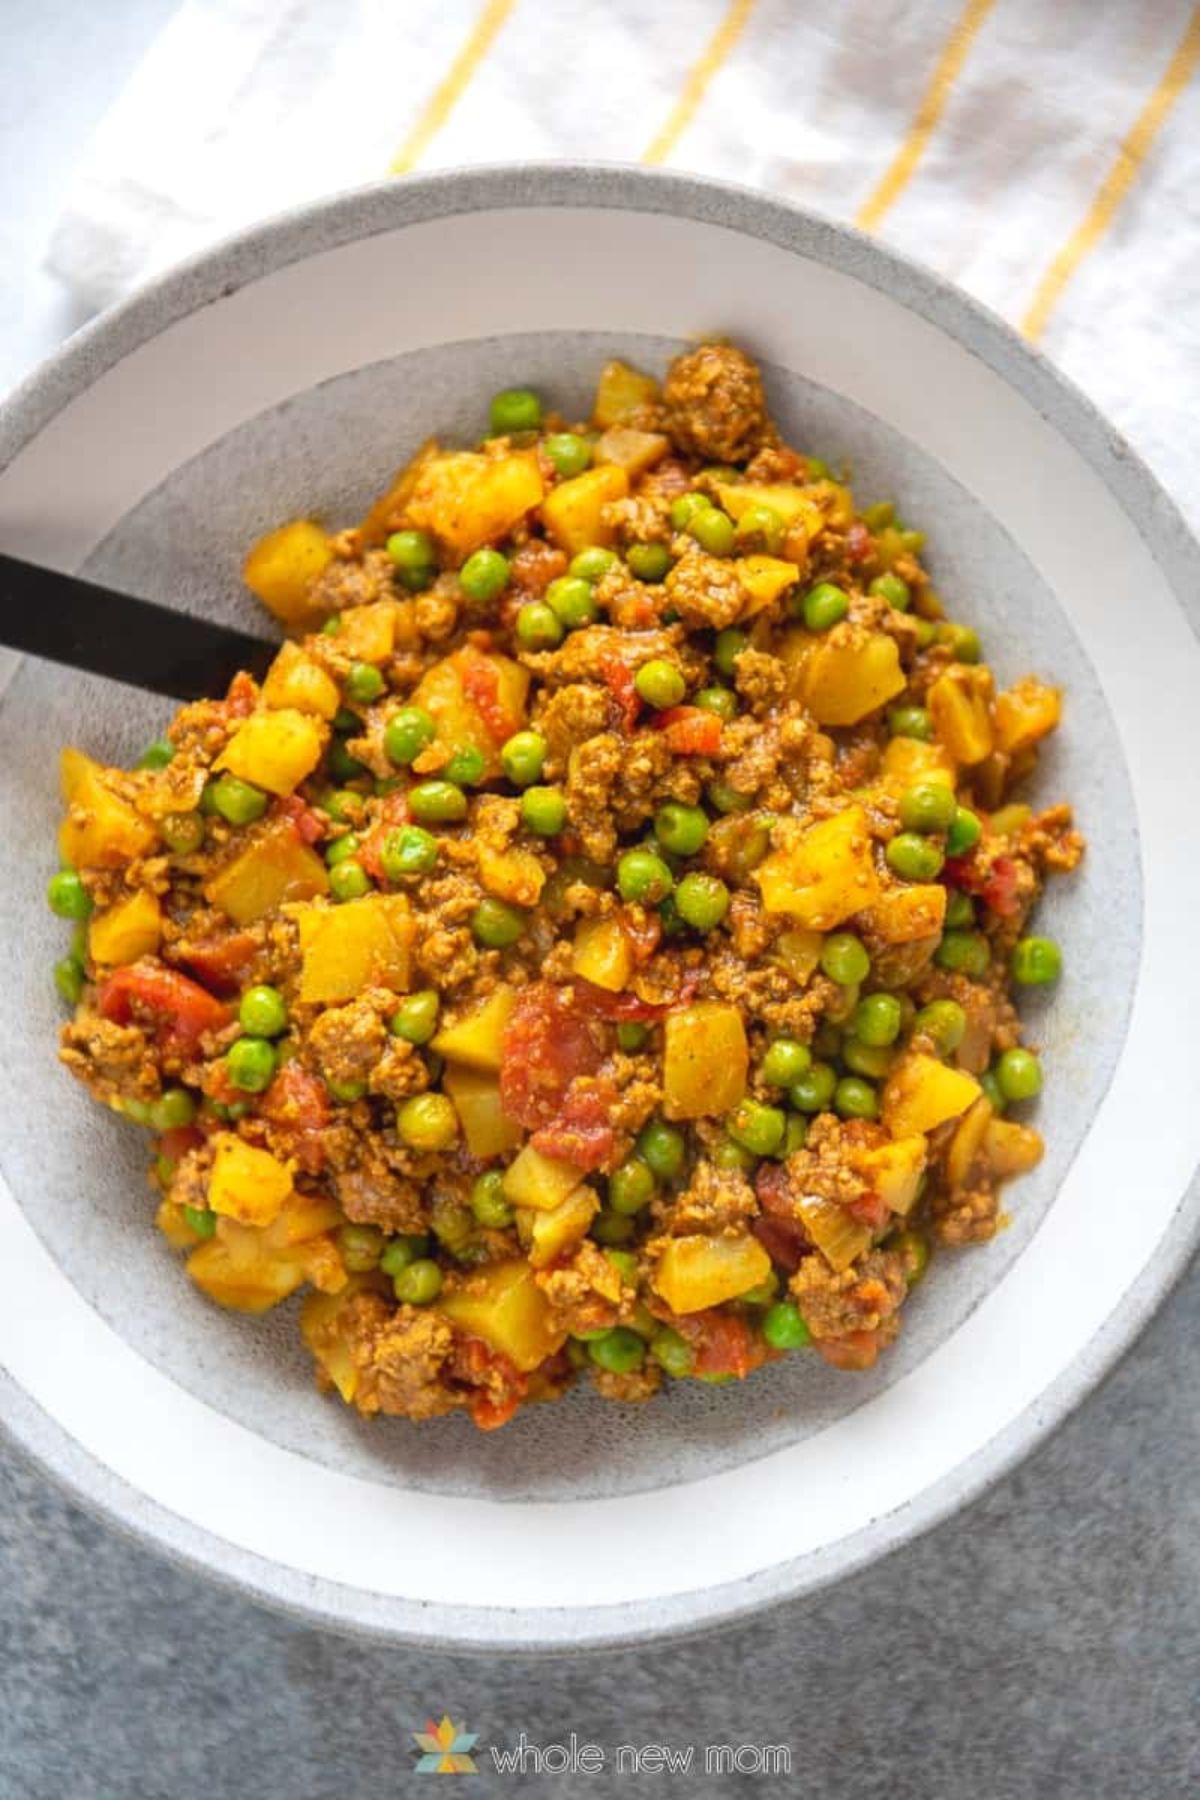 A whote bowl of curried ground beef and vegetables